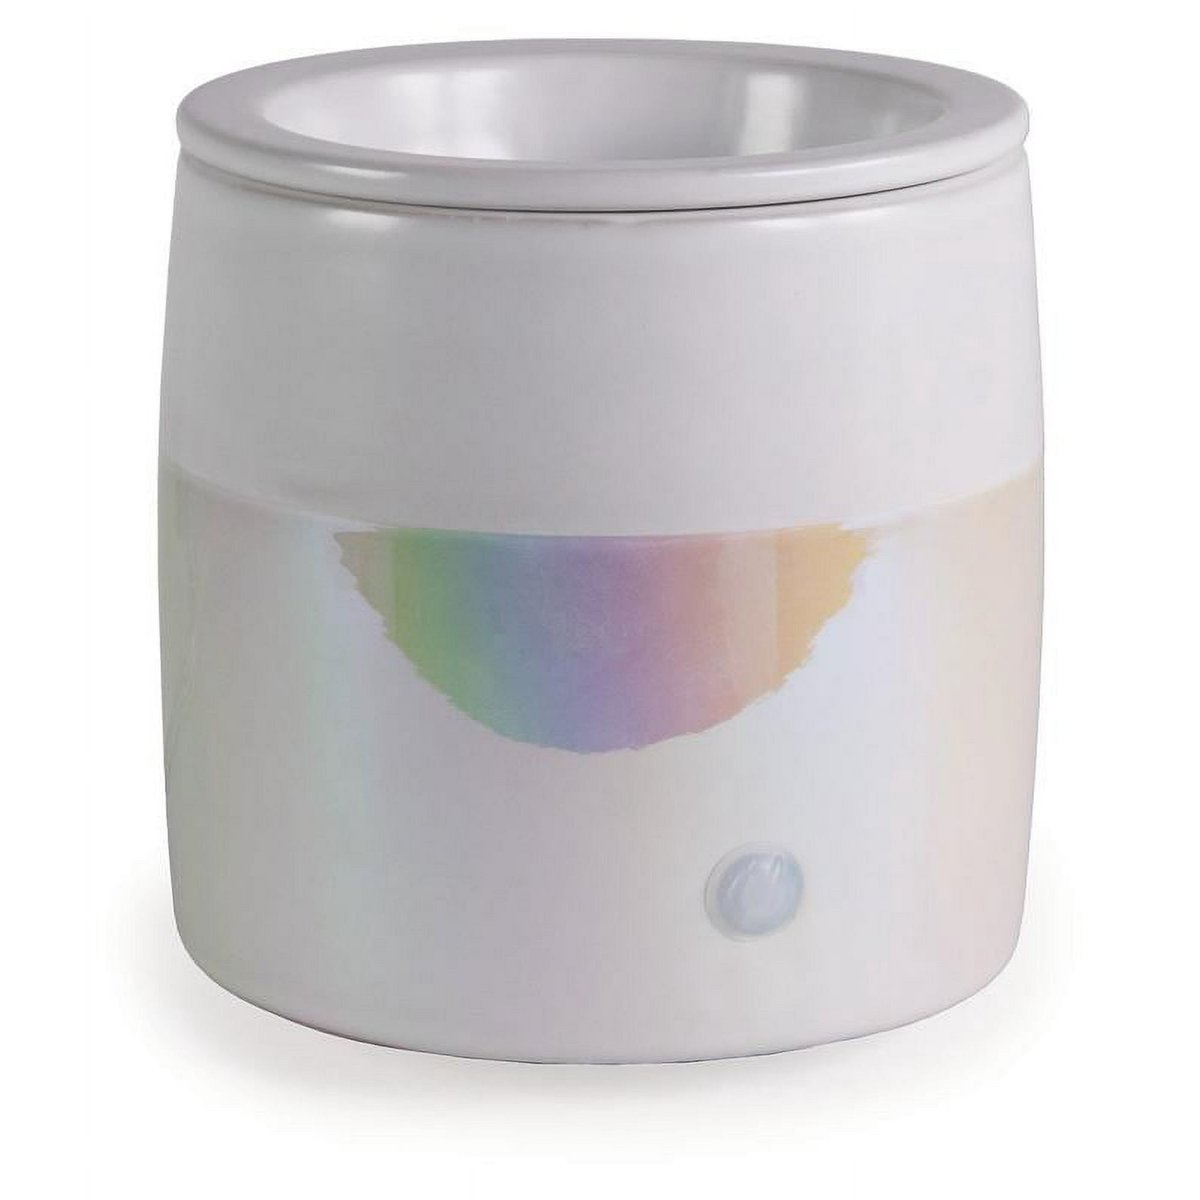 https://assets.bigcartel.com/product_images/370162465/Mainstay-Full-Size-Iridescent-Wax-Melt-Fragrance-Warmer_705d805c-d606-4921-bb22-c170993b5404.6f32db10dcc0af7428518789caf66f26.jpeg?auto=format&fit=max&h=1200&w=1200